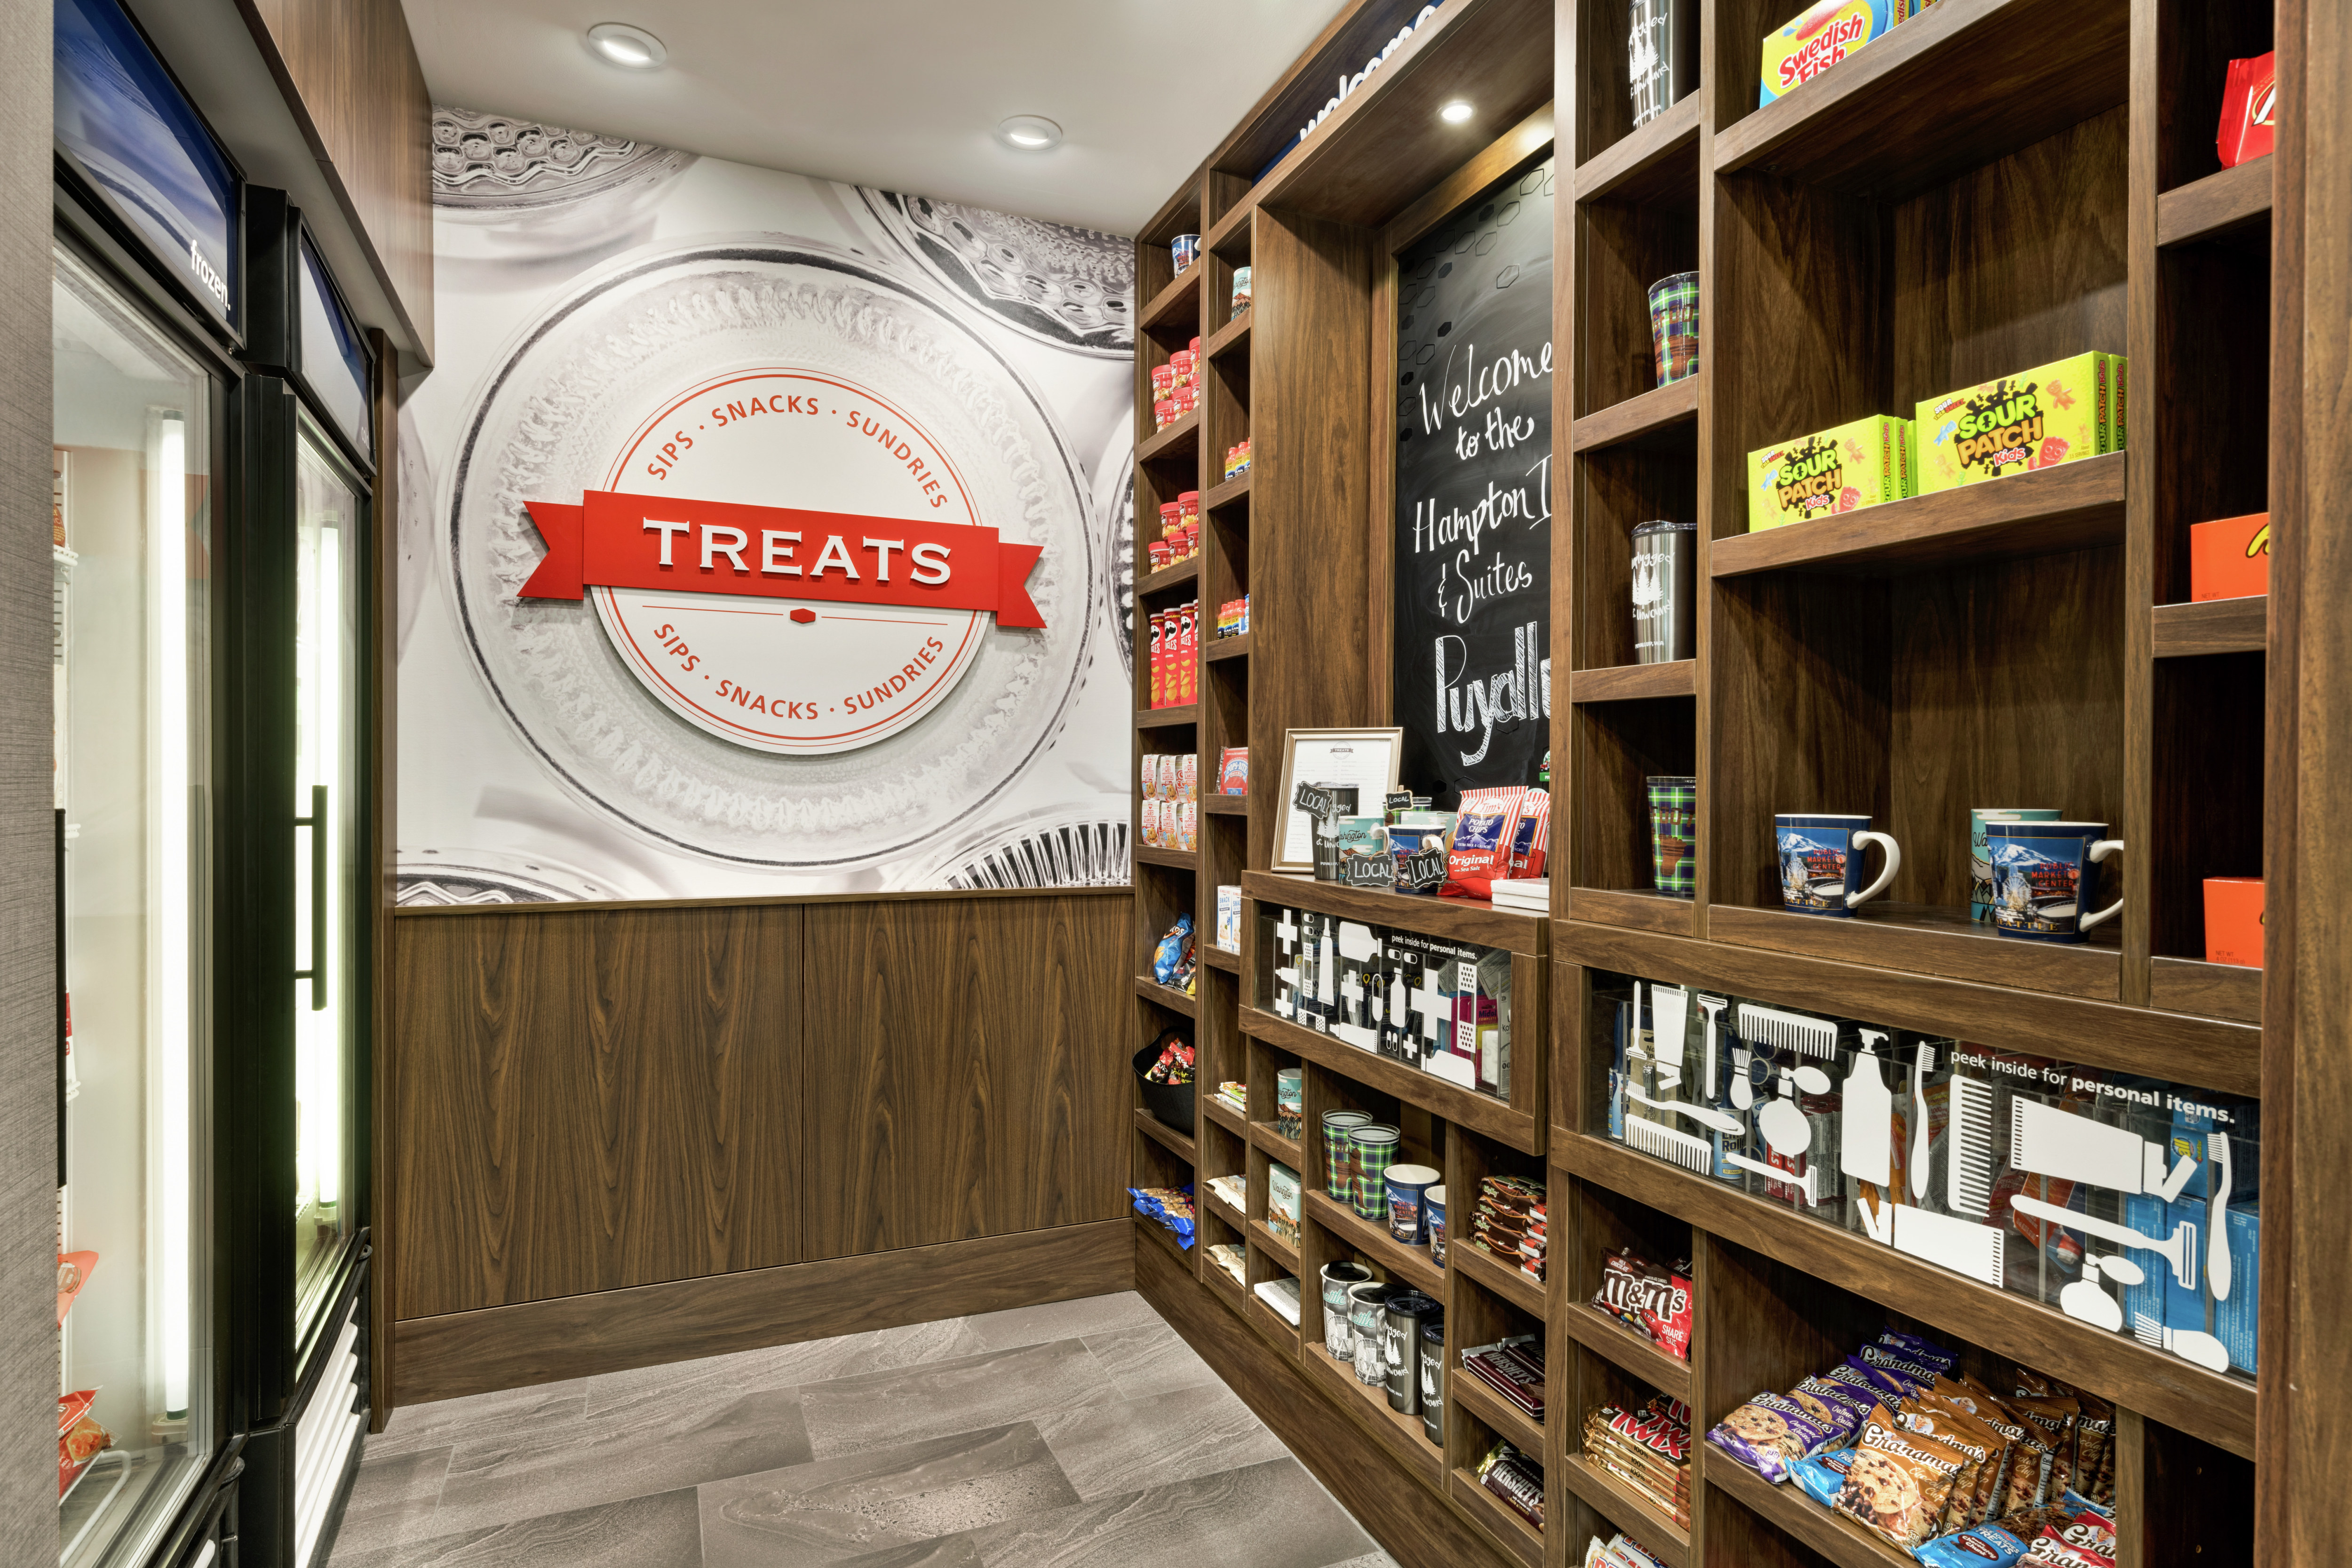 Convenient on-site treat shop fully stocked with delicious snacks, beverages, and souvenirs.